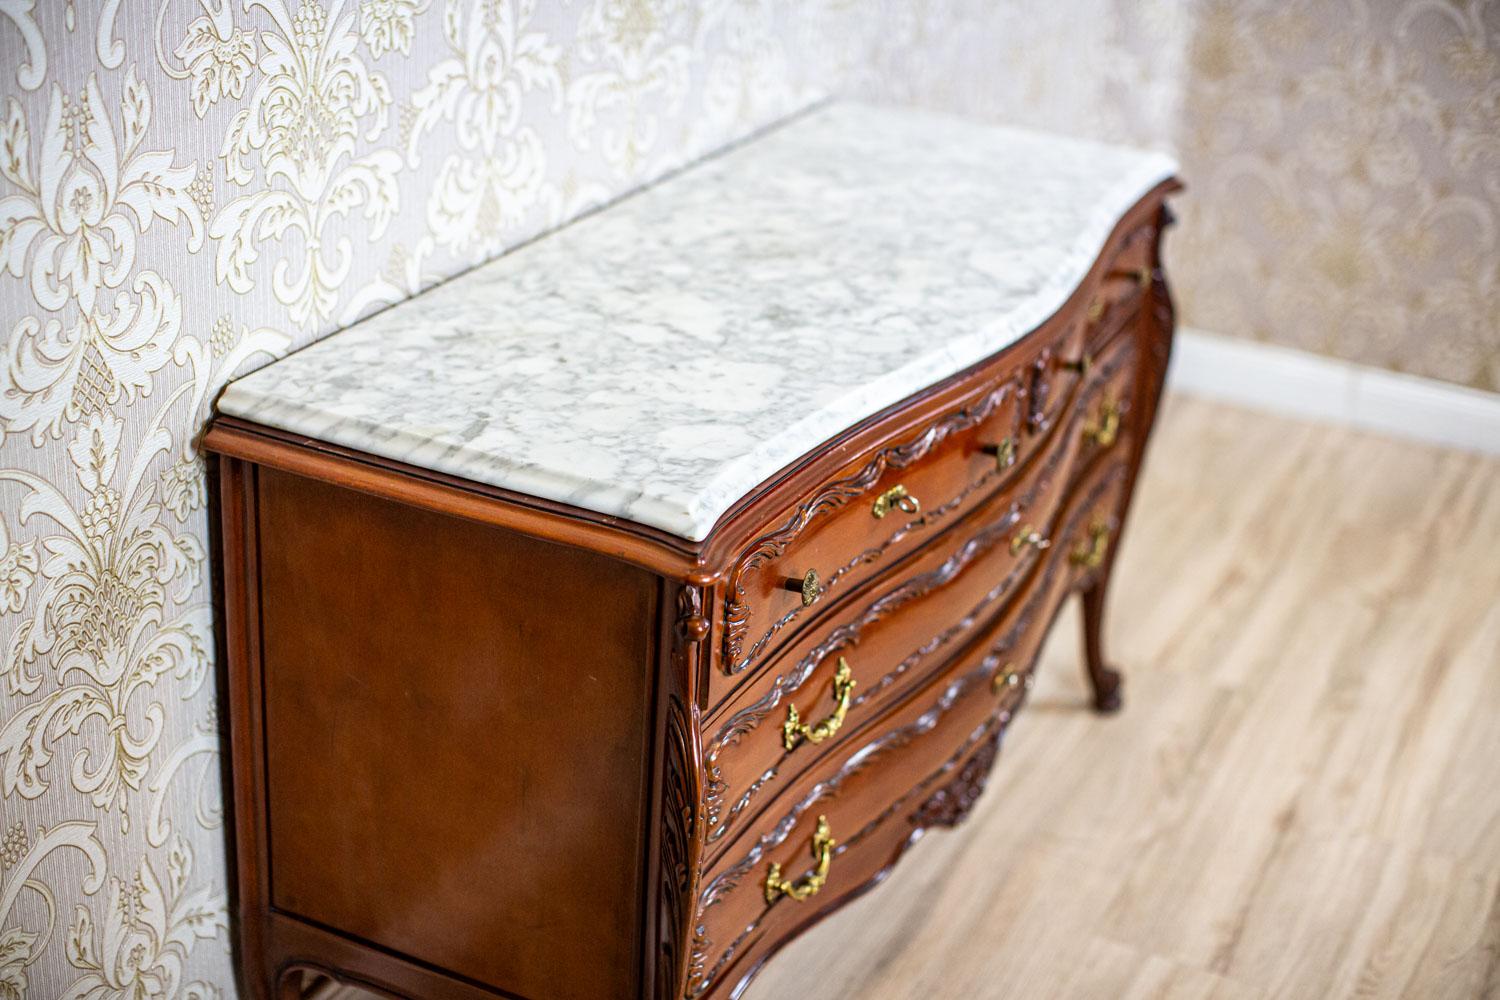 Decorative Beech Dresser From the Mid. 20th Century with Marble Top 2